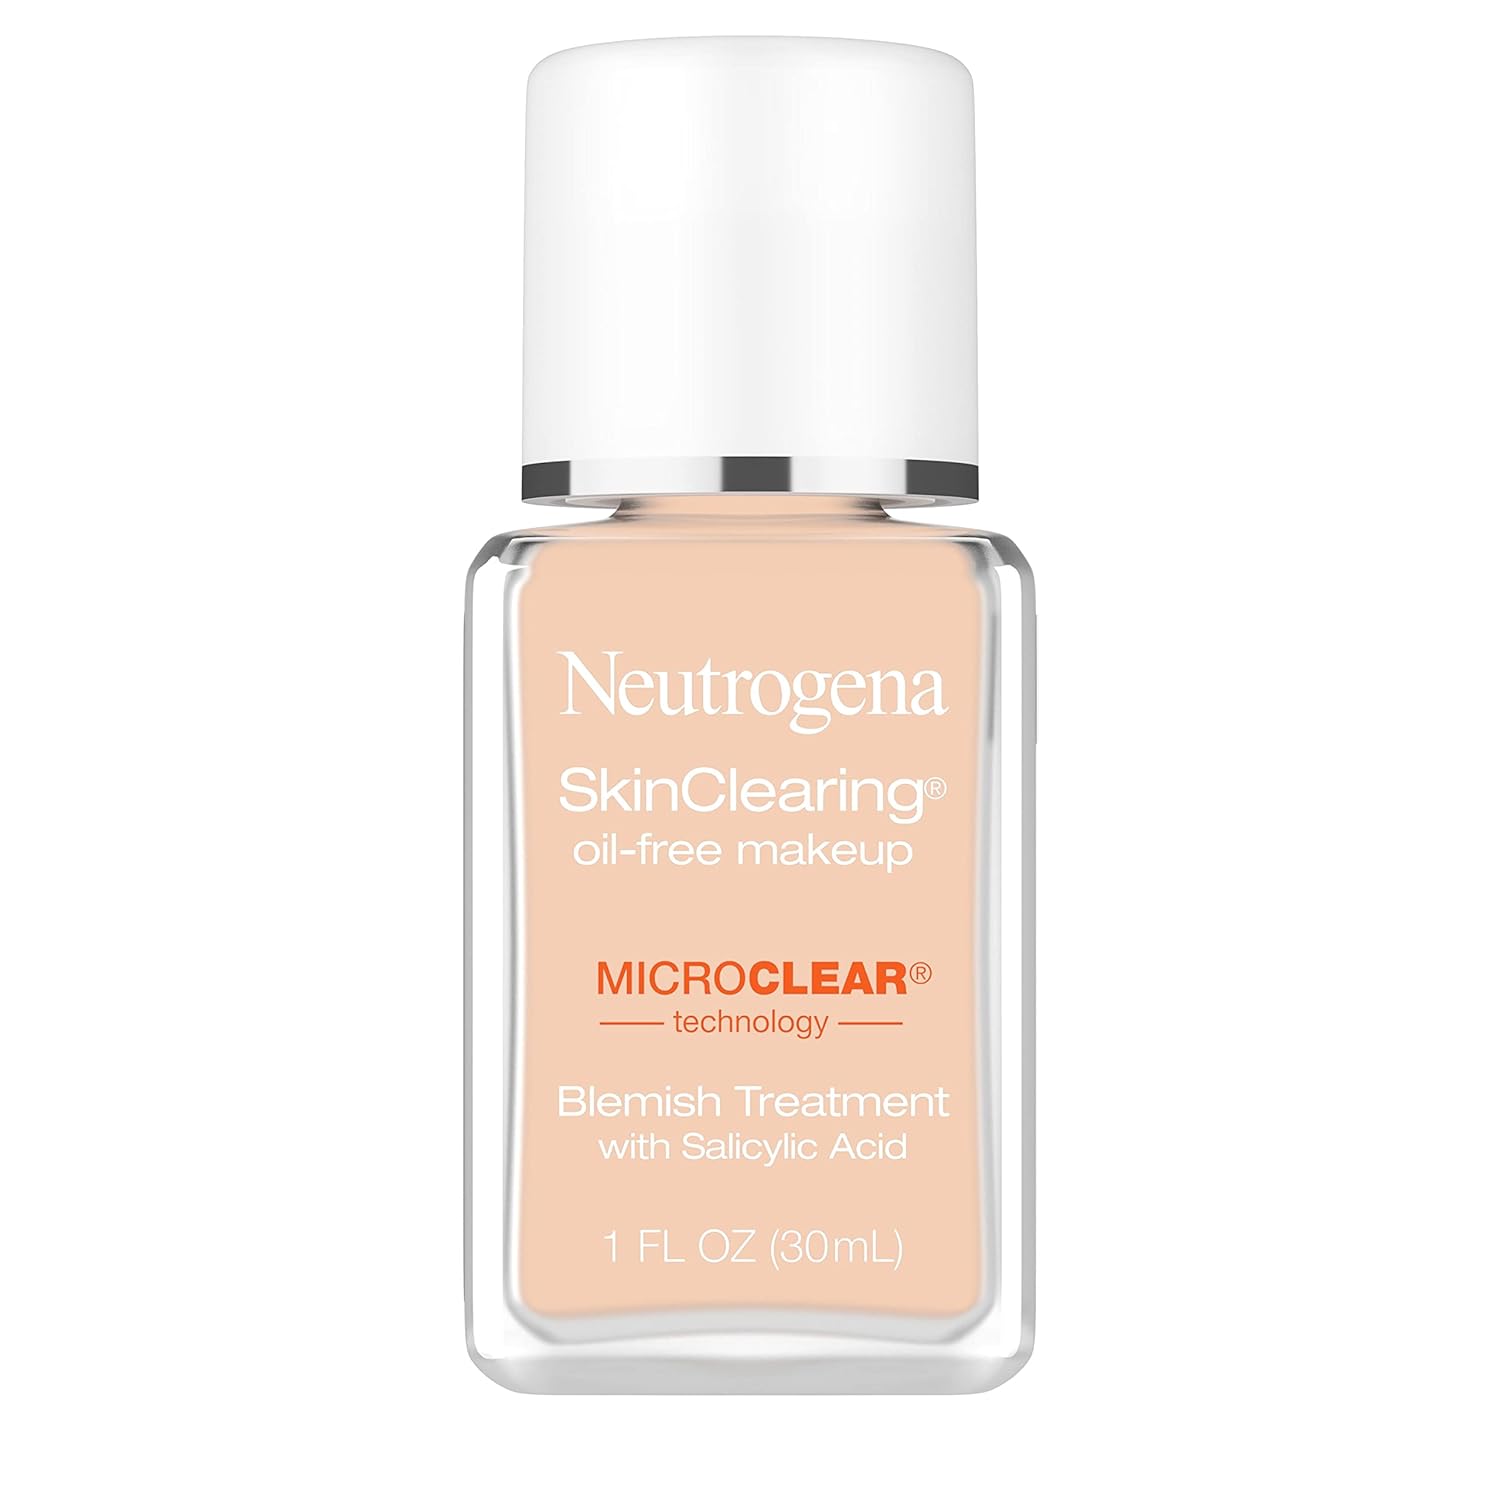 Neutrogena SkinClearing Oil-Free Acne and Blemish Fighting